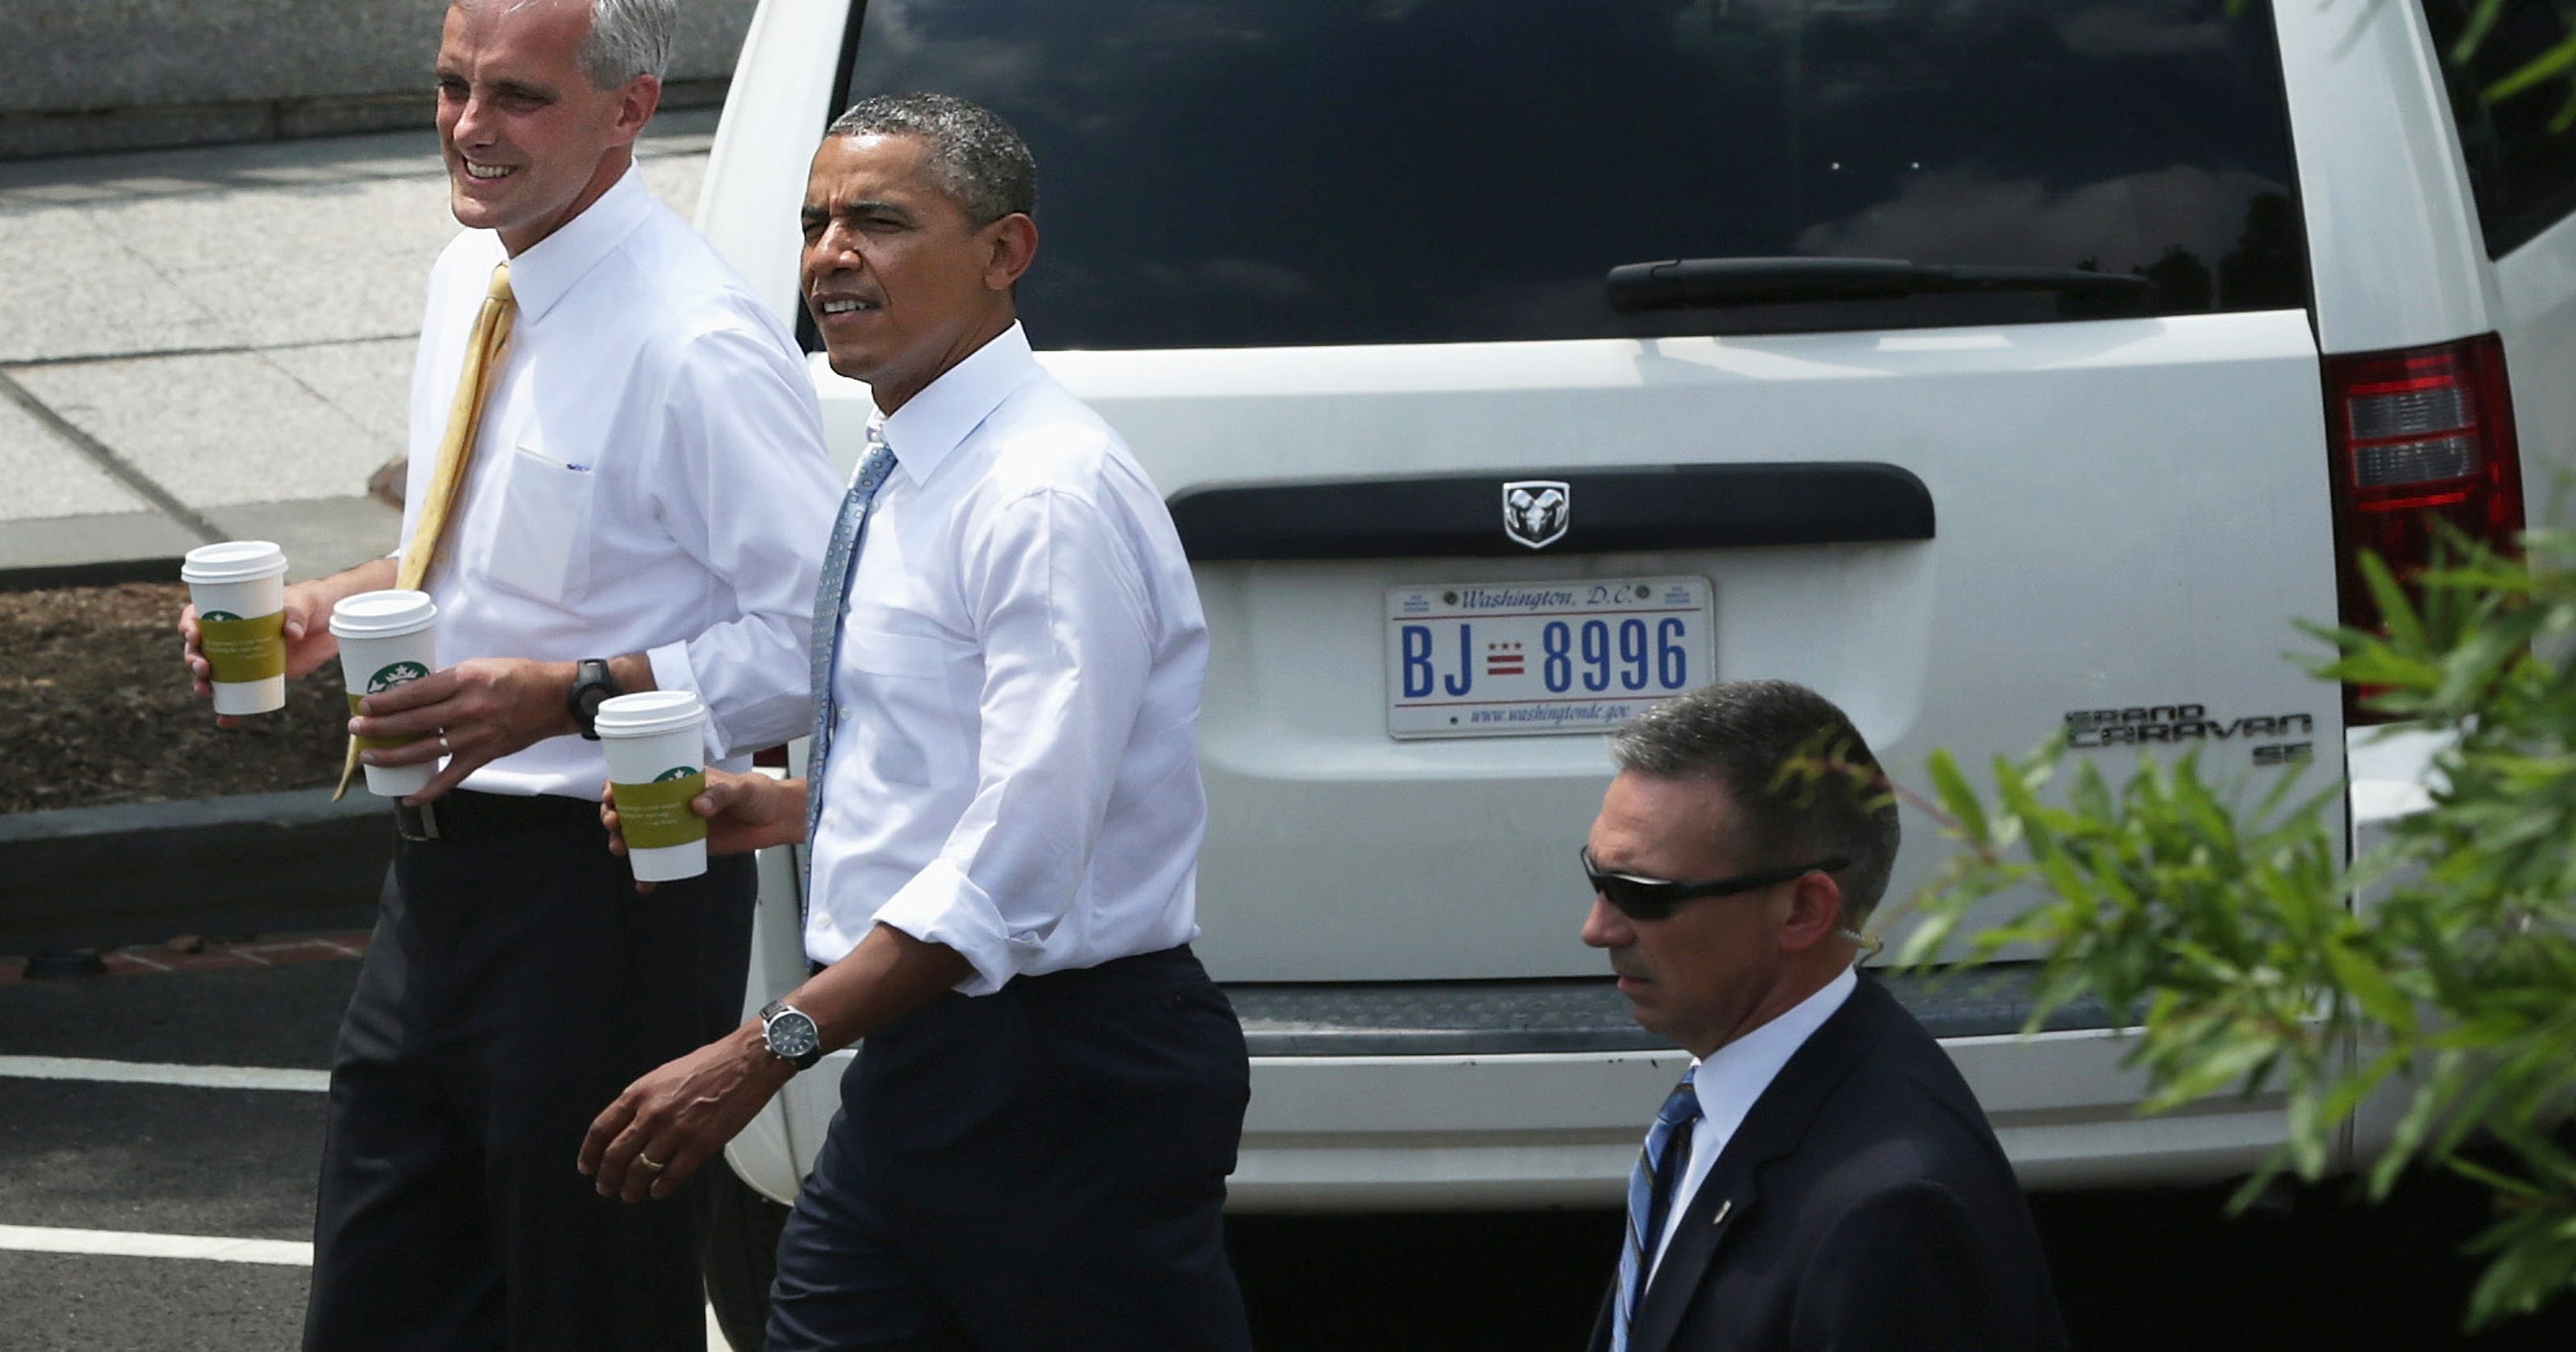 Obama Goes For Starbucks Run Without The Press 8613